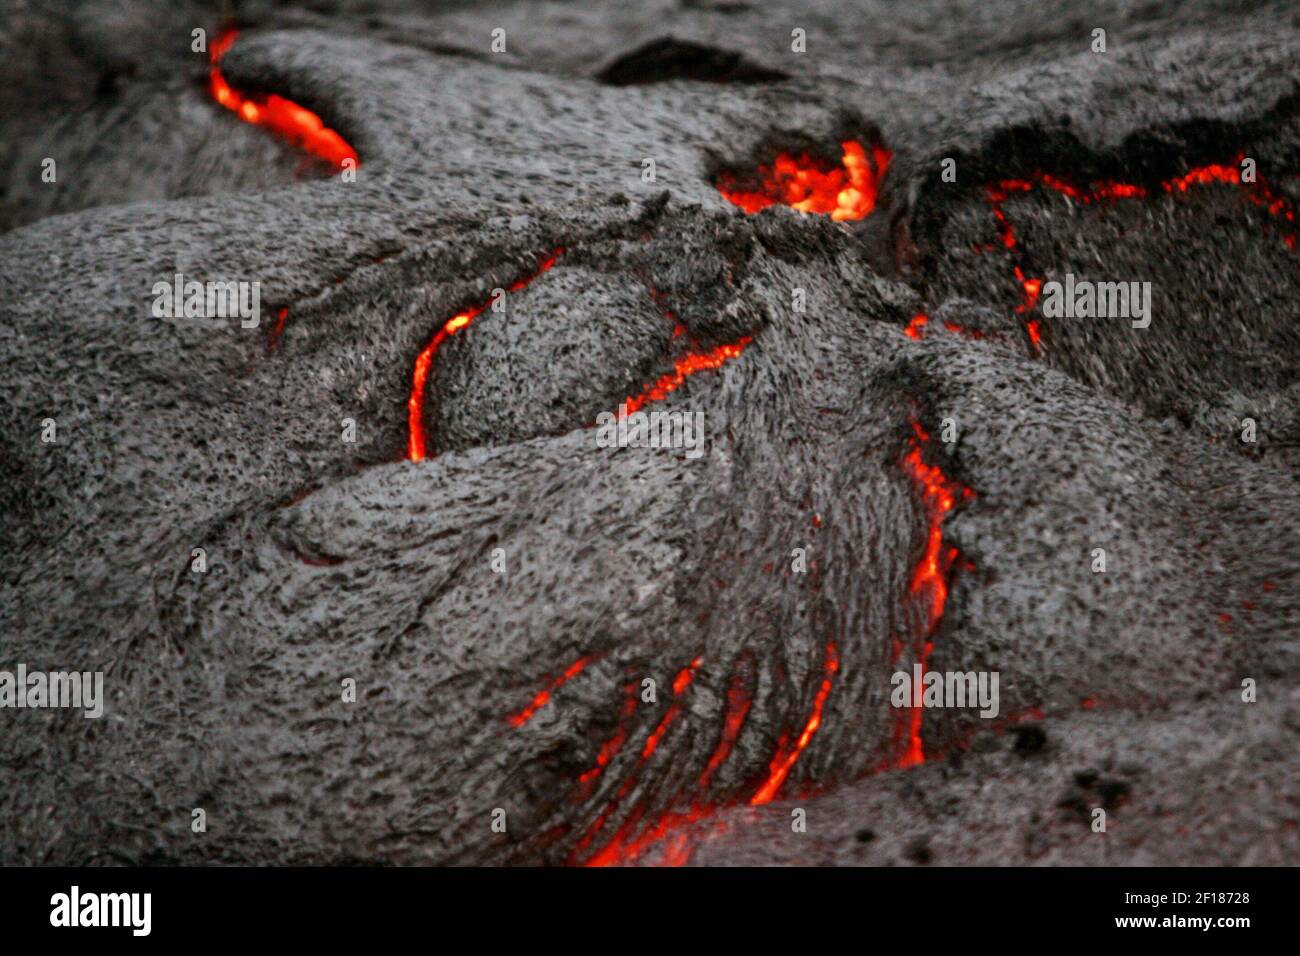 -- NO MAGS, NO SALES -- KRT TRAVEL STORY SLUGGED: UST-KILAUEA KRT PHOTOGRAPH BY LOUIS DeLUCA/DALLAS MORNING NEWS (May 2) A detail of one of the active lava areas almost looks like a menacing face at Kilauea, an active volcano on the big island of Hawai'i. The curious must brave a three-hour hike over past dried lava flows in order to see the new ones up close. (Photo by lde) 2005 Stock Photo